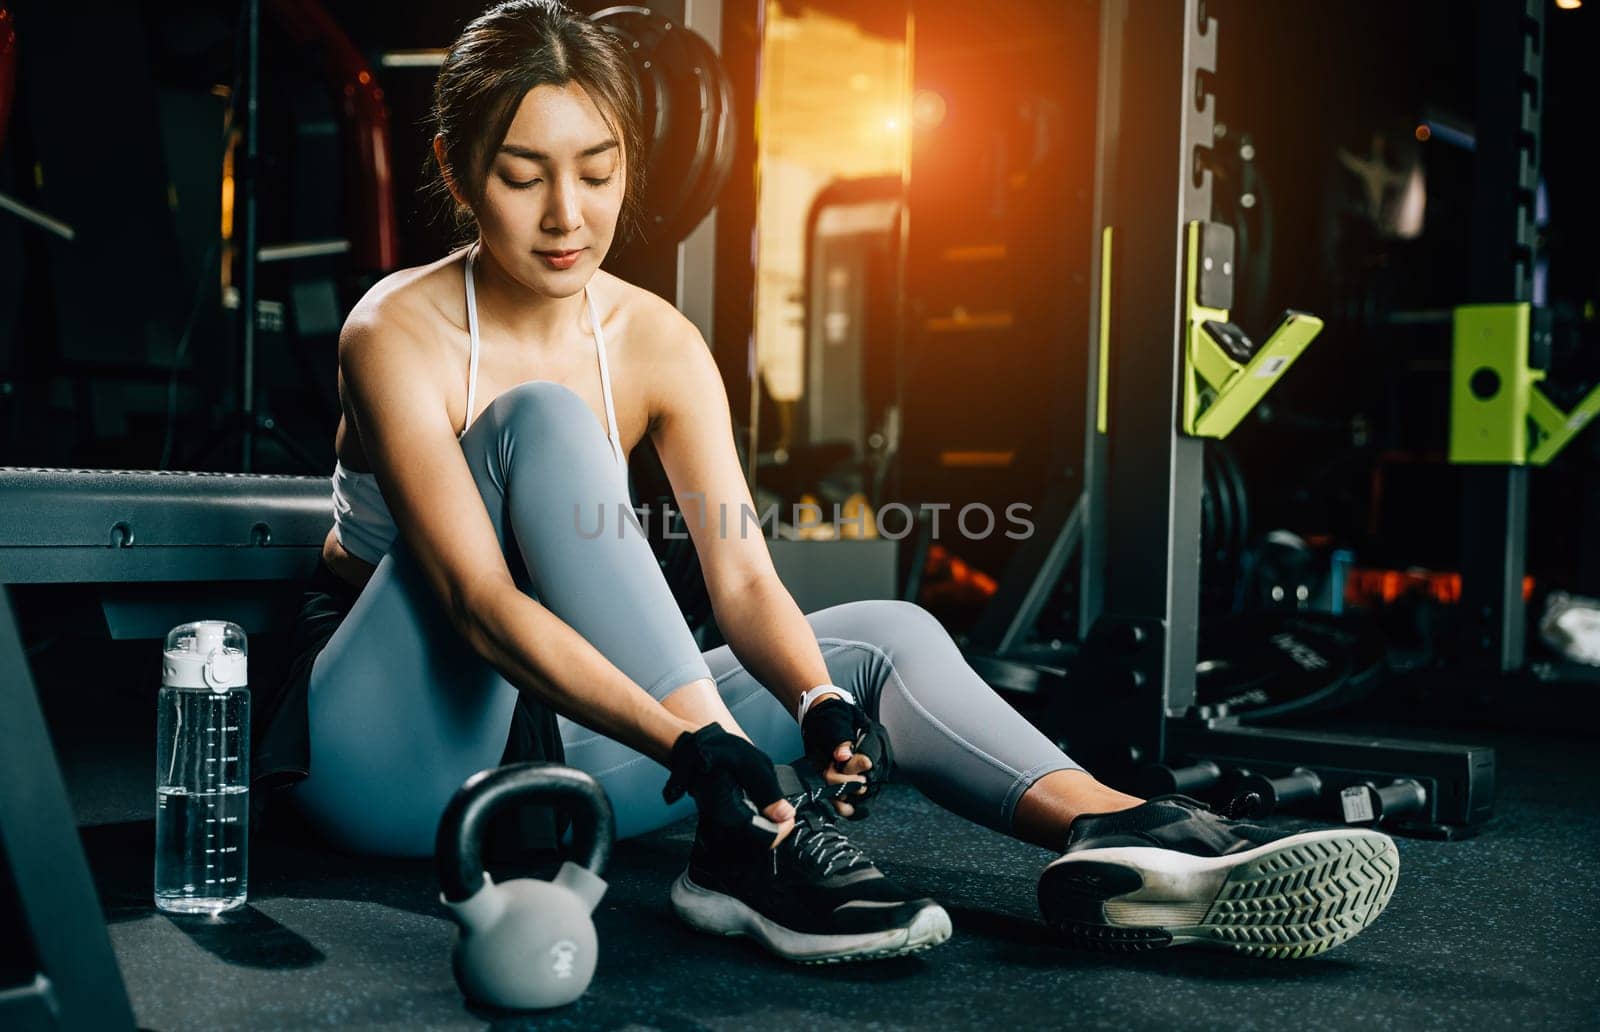 A sportive girl tying her sneakers in preparation for her exercise routine. The shot showcases her stylish shoes and sporty gym pants.